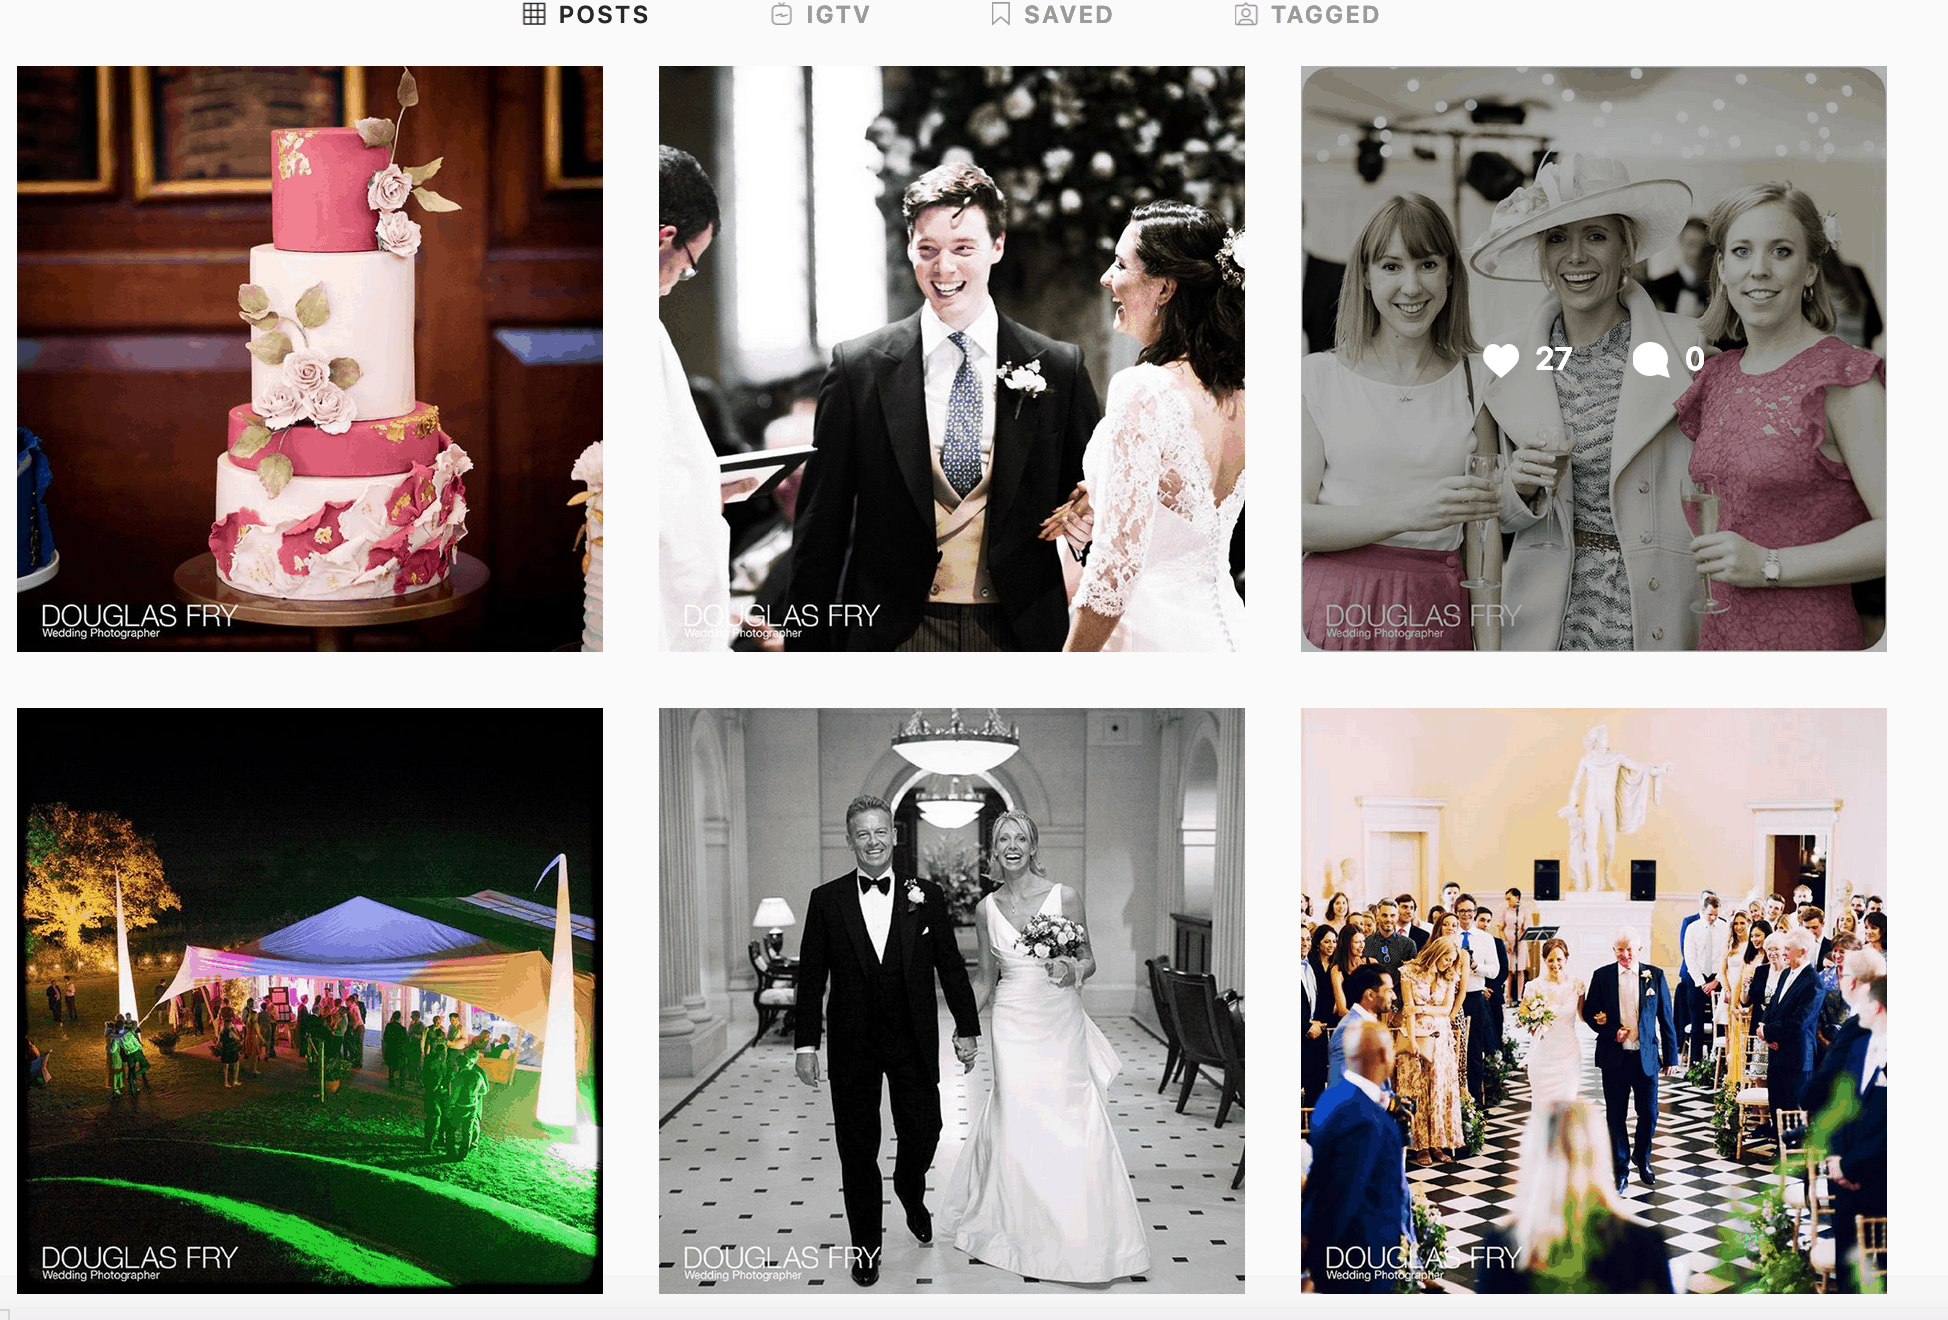 Photographs on Instagram page for wedding photographer